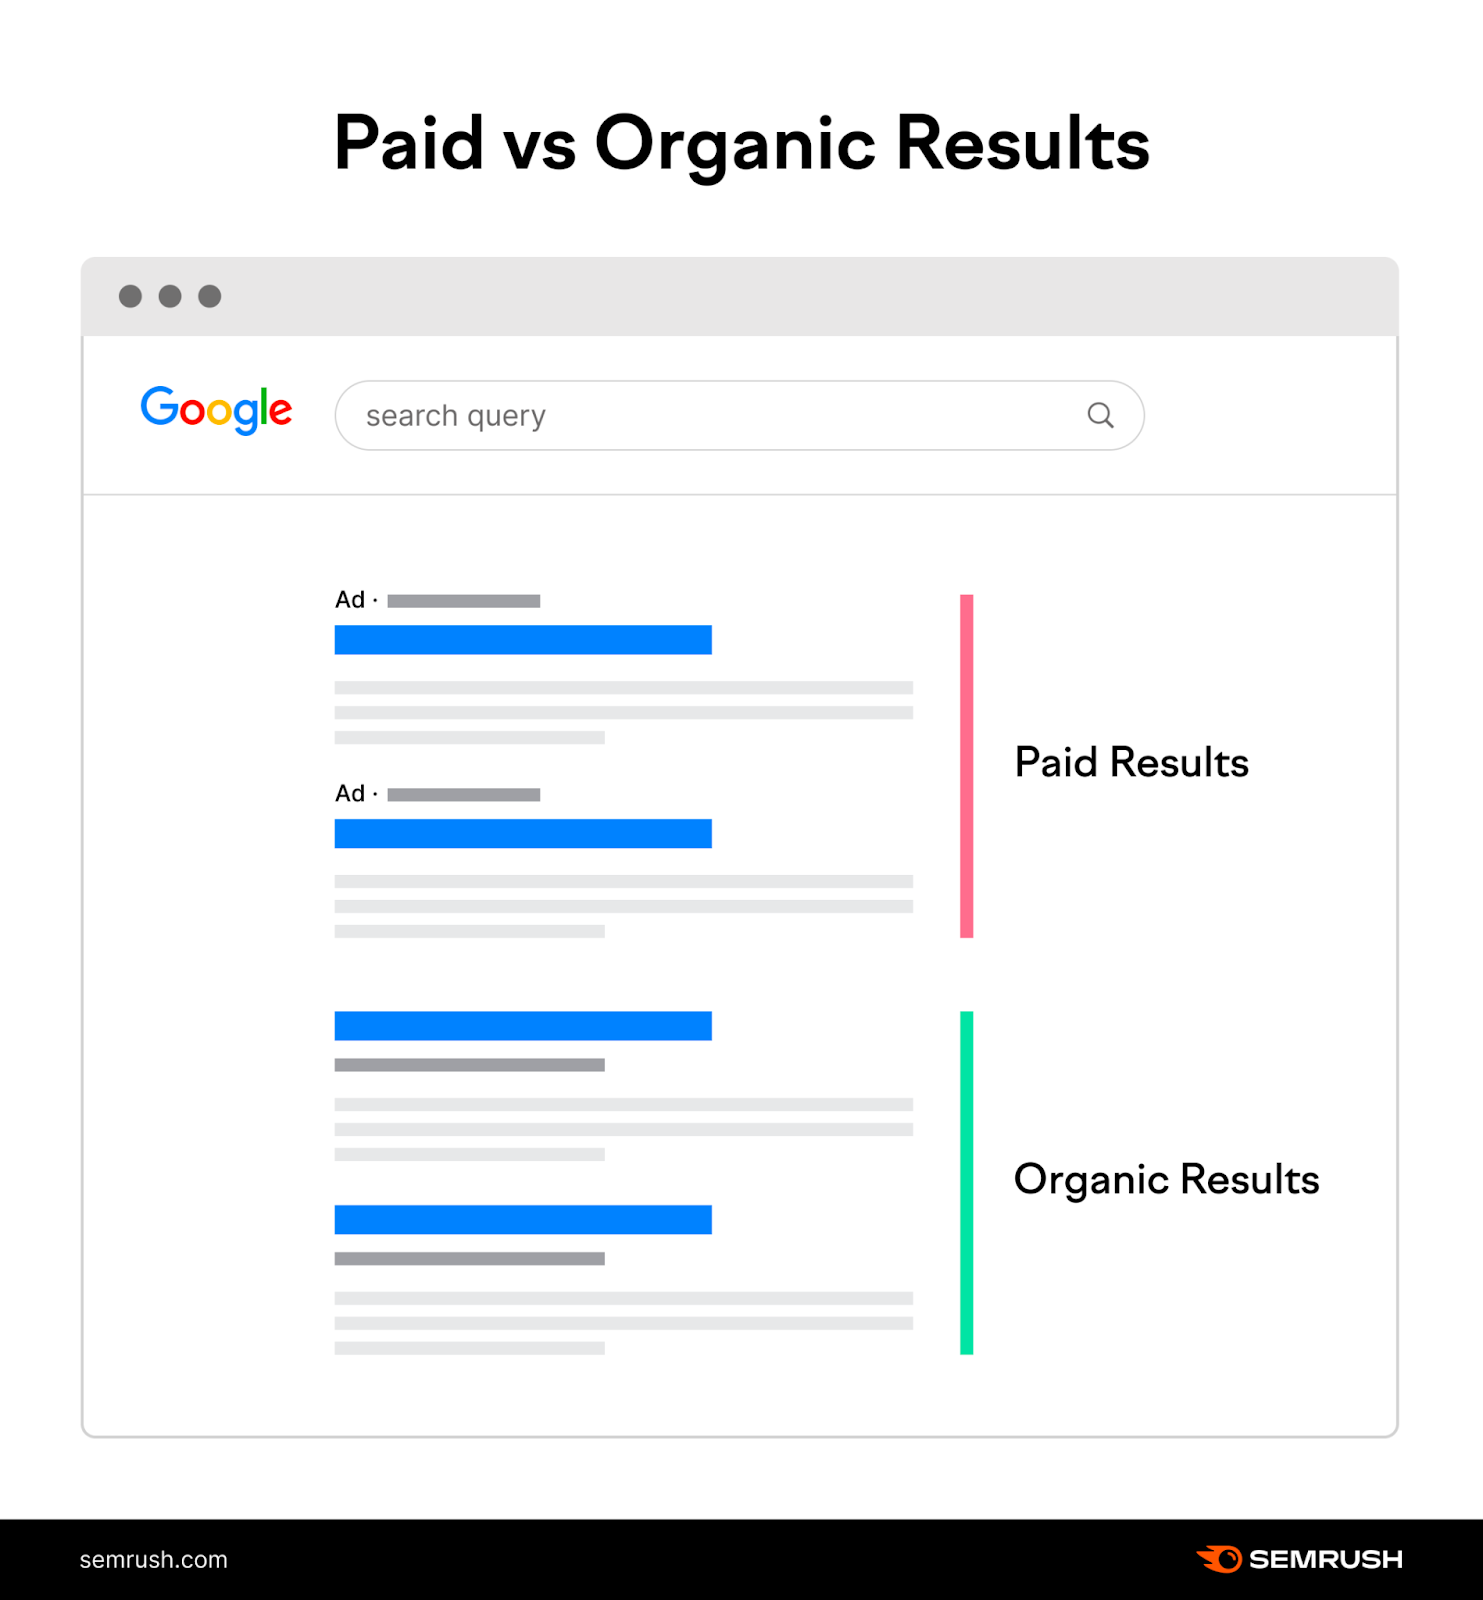 an infographic by Semrush showing paid vs organic search results